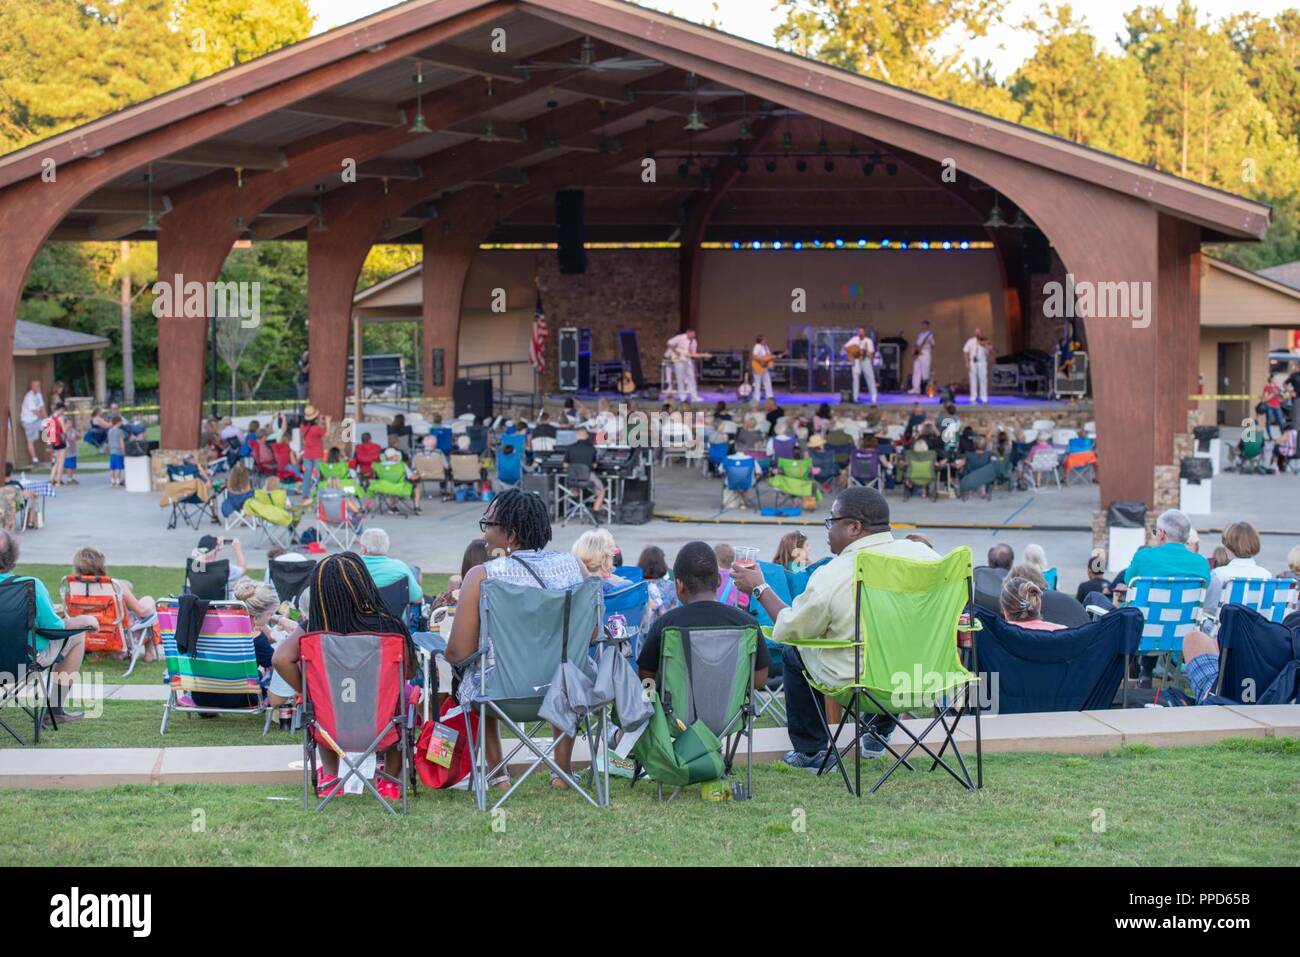 JOHNS CREEK, Ga. (Aug. 31, 2018) Audience members enjoy an outdoor performance by the U.S. Navy Band Country Current at the Mark Burkhalter Amphitheater at Newtown Park in Johns Creek, Georgia. Country Current is on a ten-day tour through Virginia, North Carolina, Georgia and Florida, entertaining audiences while connecting Americans to their Navy. Stock Photo